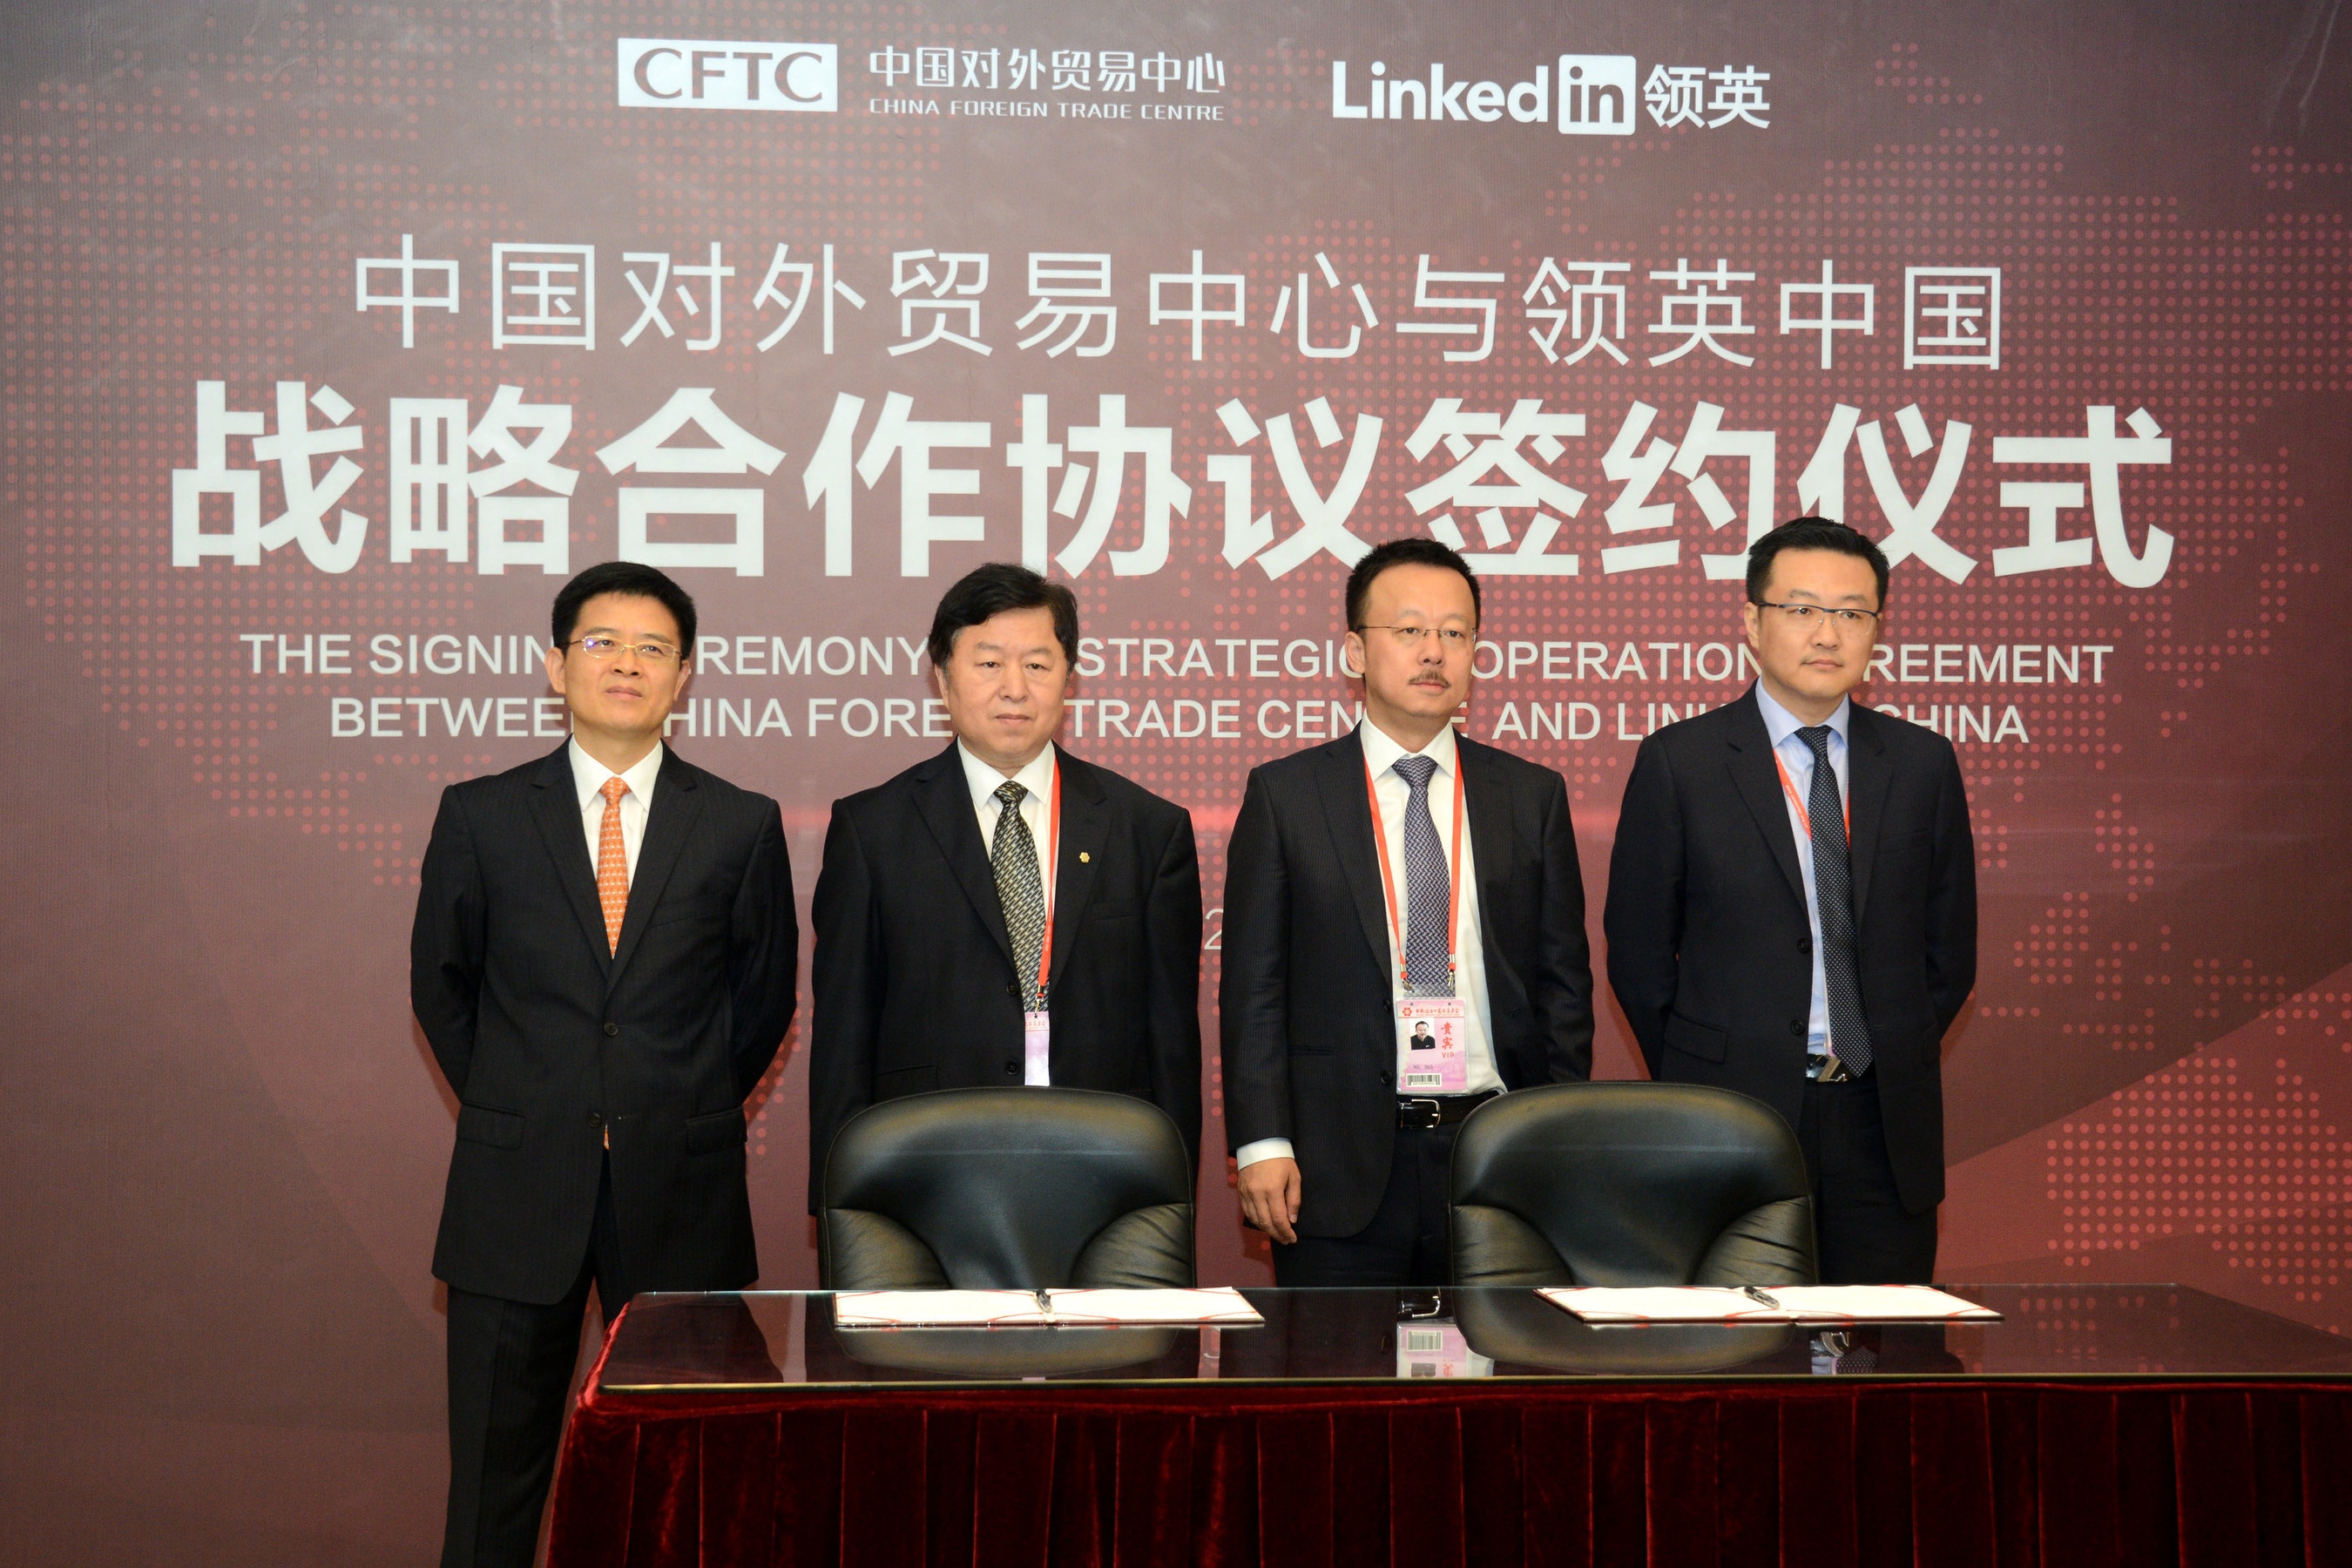 China Foreign Trade Centre concluded a cooperation agreement with LinkedIn China on April 25, 2016 at the 119th Canton Fair.